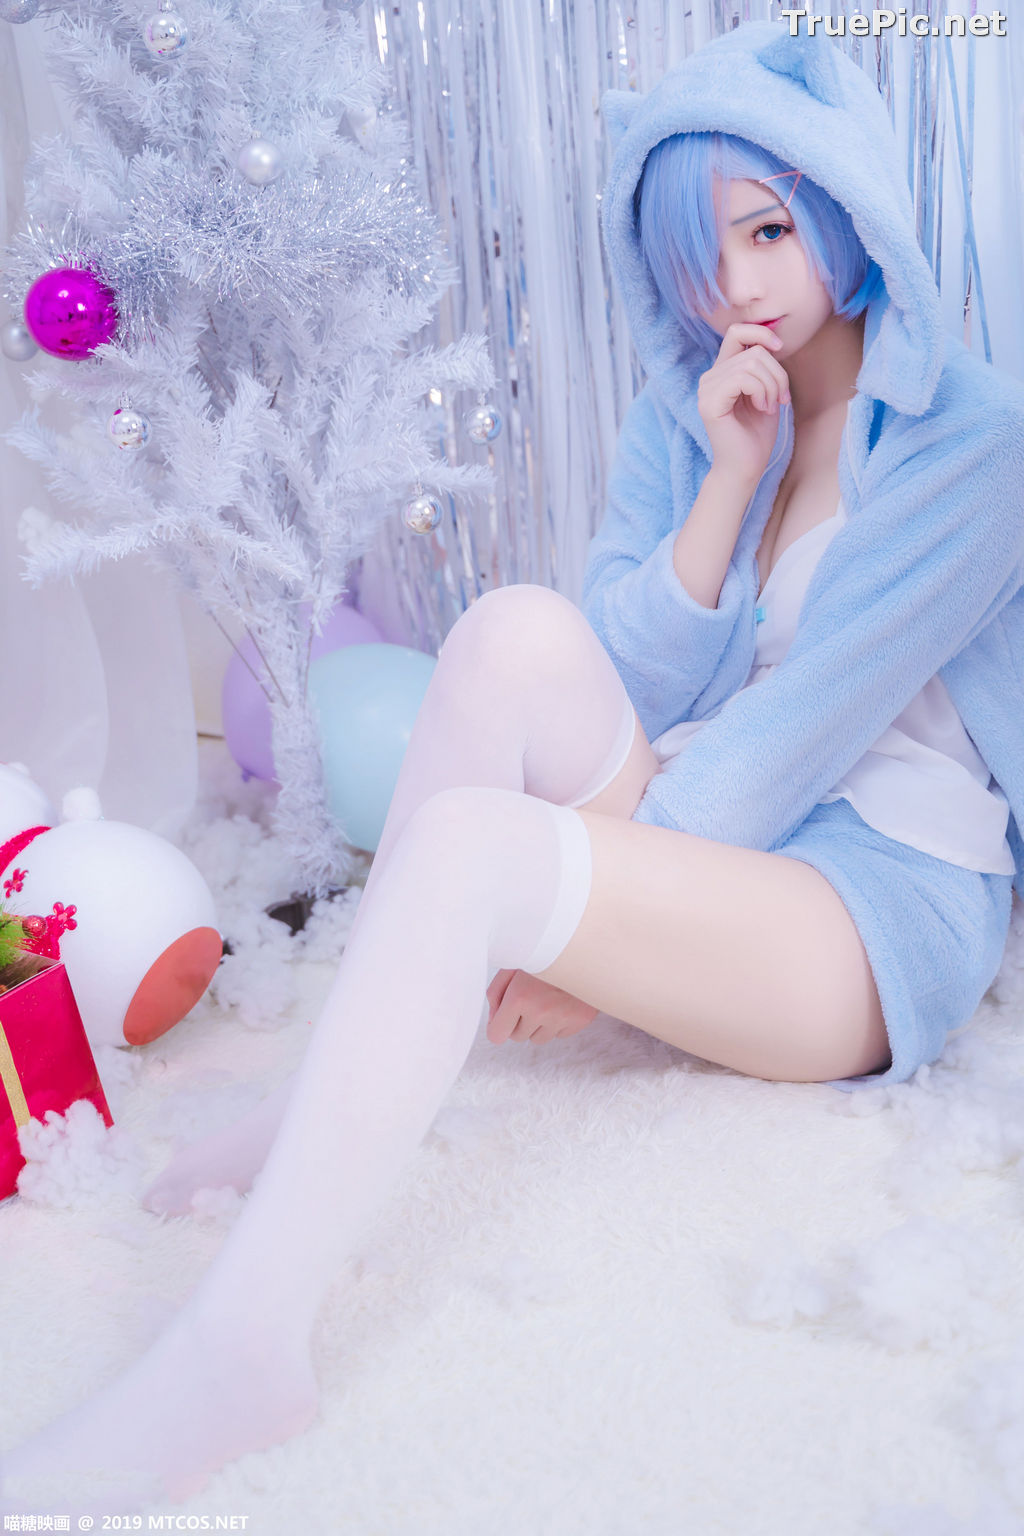 Image [MTCos] 喵糖映画 Vol.043 – Chinese Cute Model – Sexy Rem Cosplay - TruePic.net - Picture-2